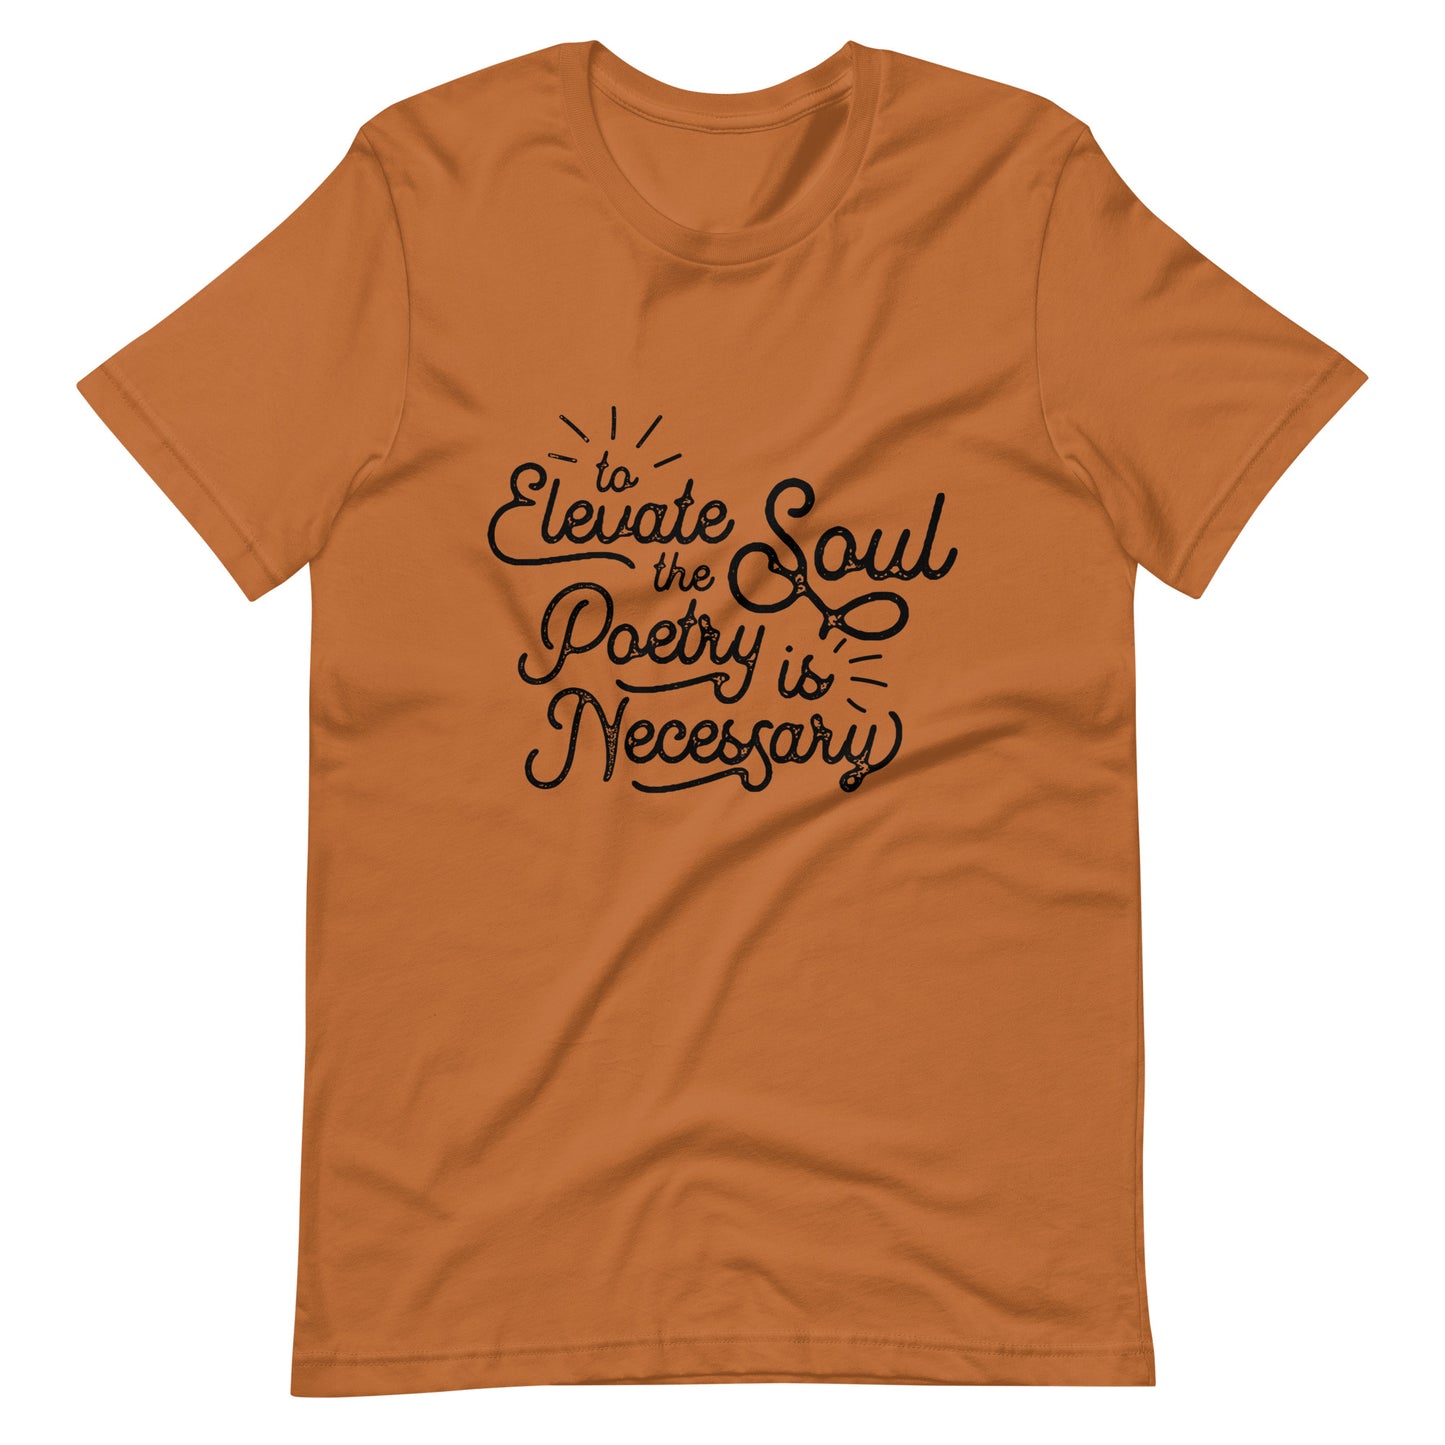 To Elevate the Soul Edgar Allan Poe Quote - Men's t-shirt - Toast Front